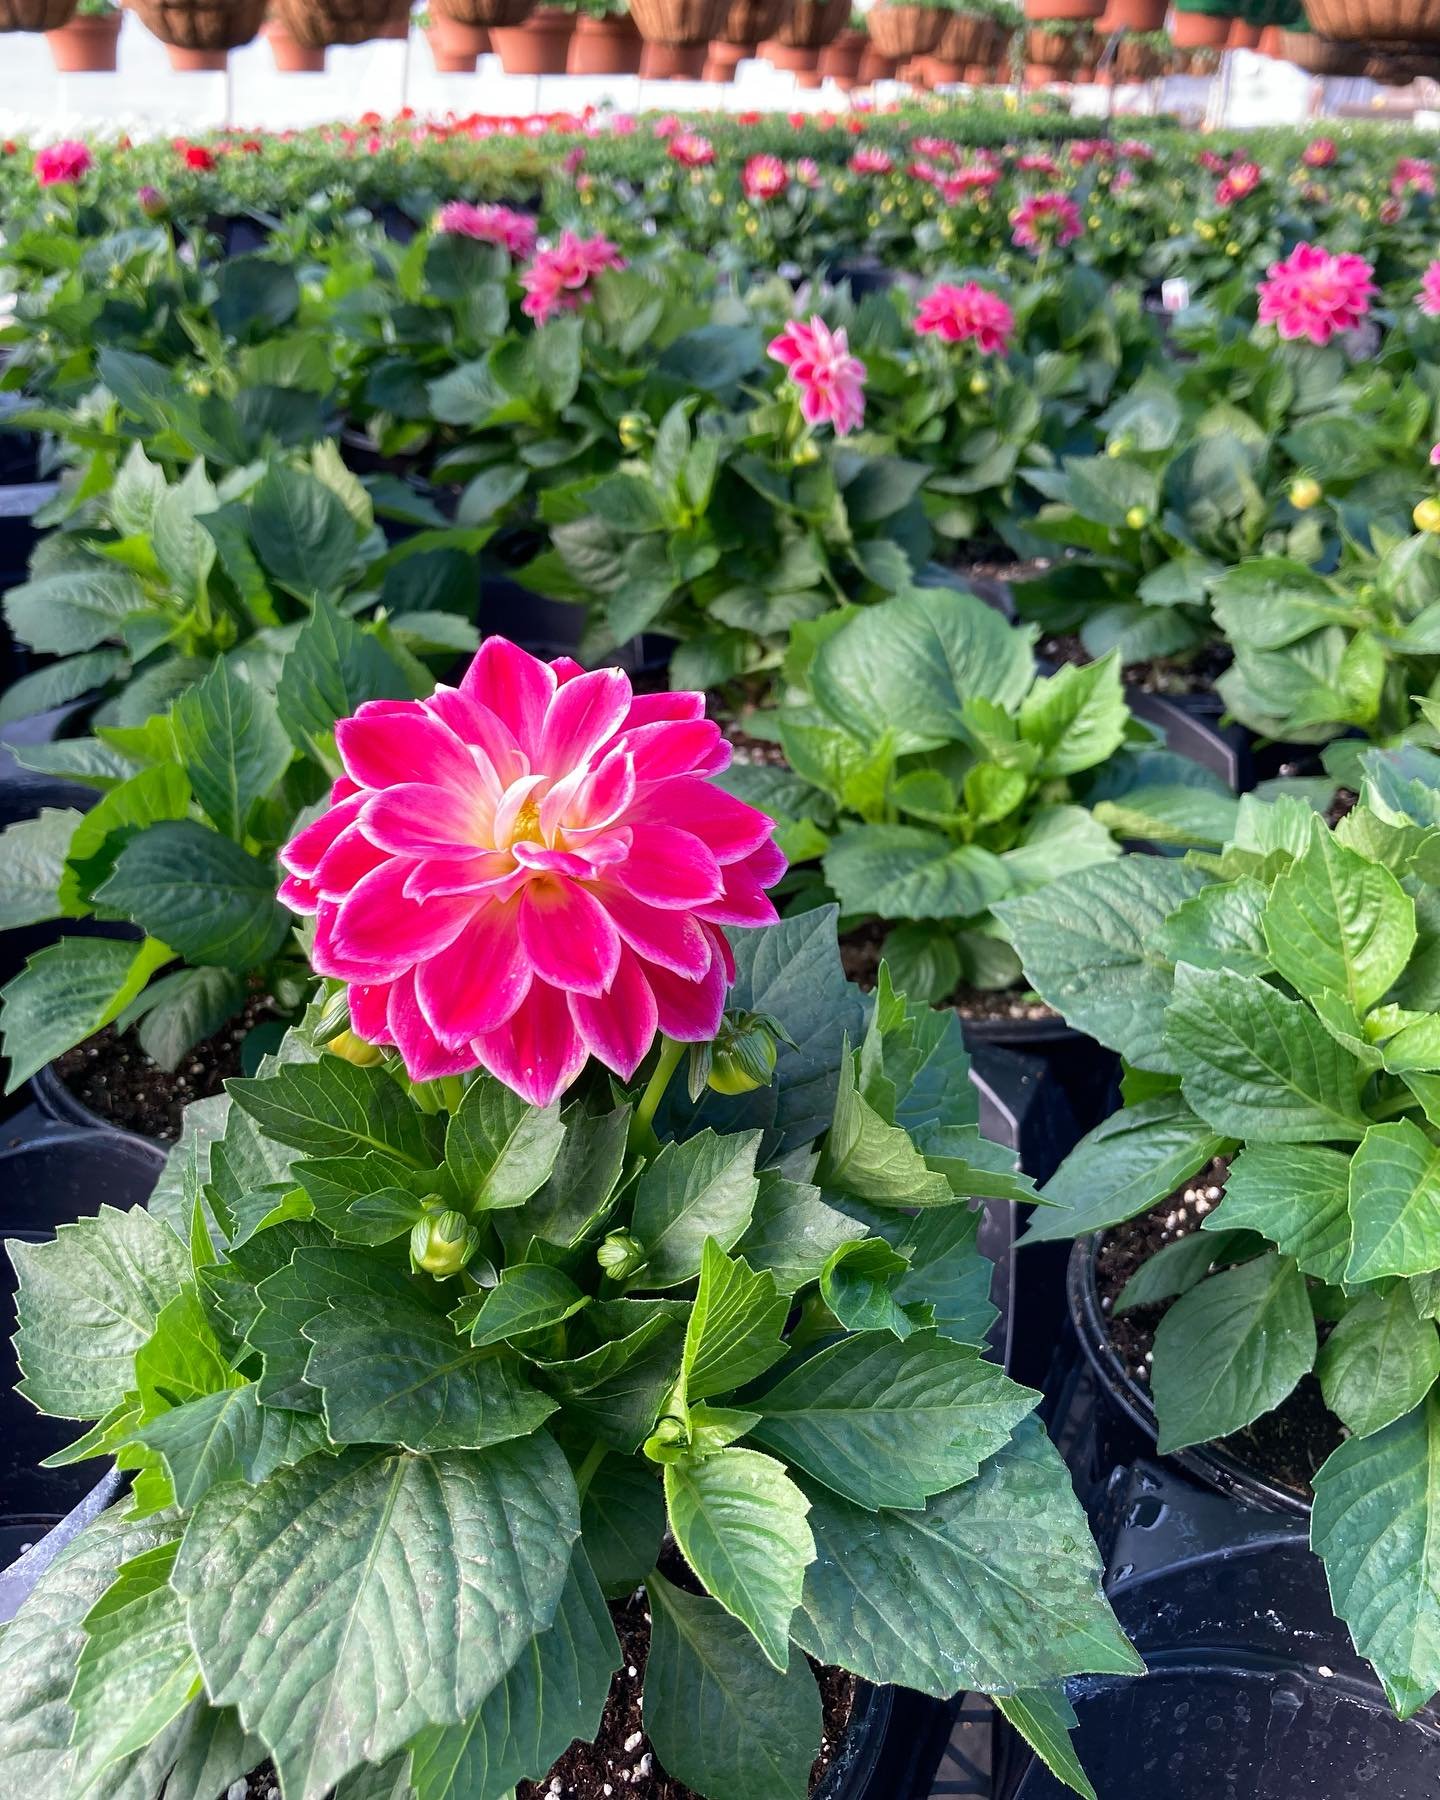 It&rsquo;s a beautiful day to explore the greenhouses! The sun is shining and blooms are out! We have cold hardy organic veggie and herb starts that are ready to hop into your garden. Bring some color to your deck or front steps with spring perennial